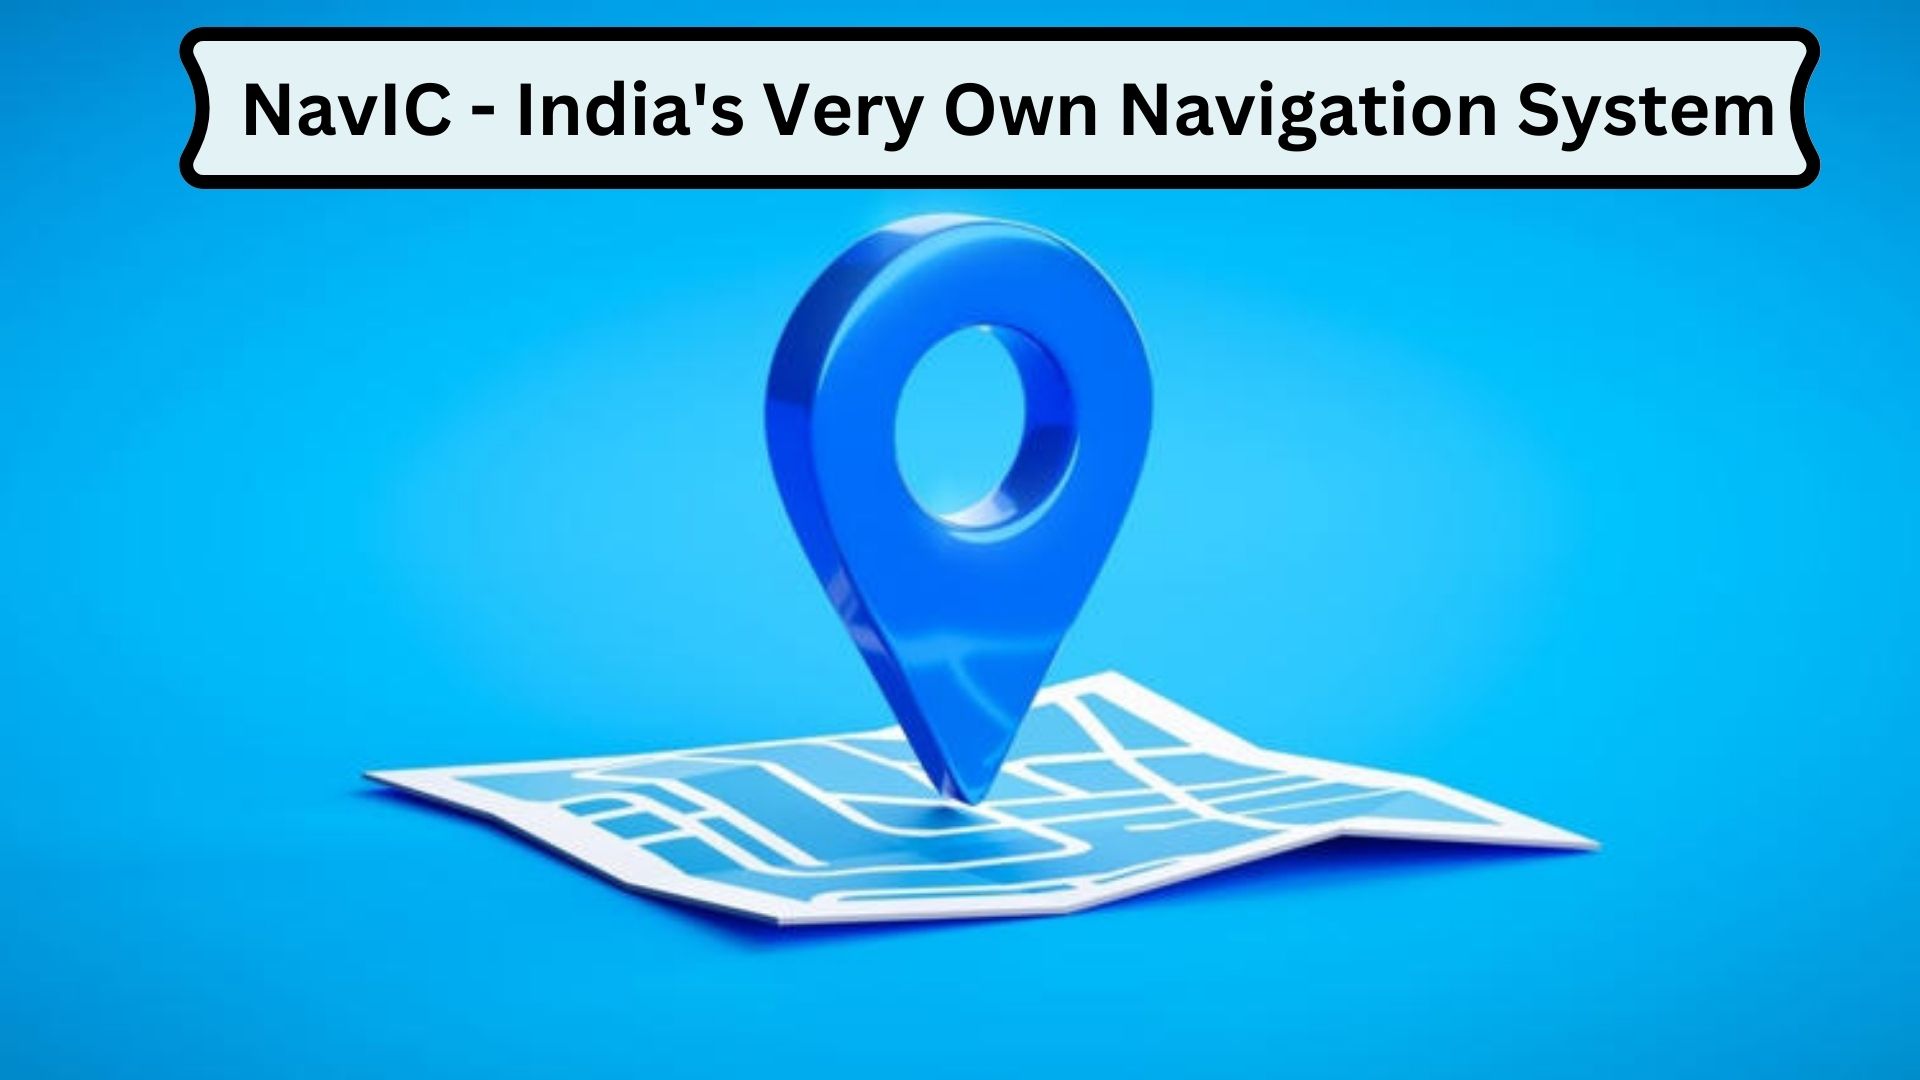 NavIC - India's Very Own Navigation System